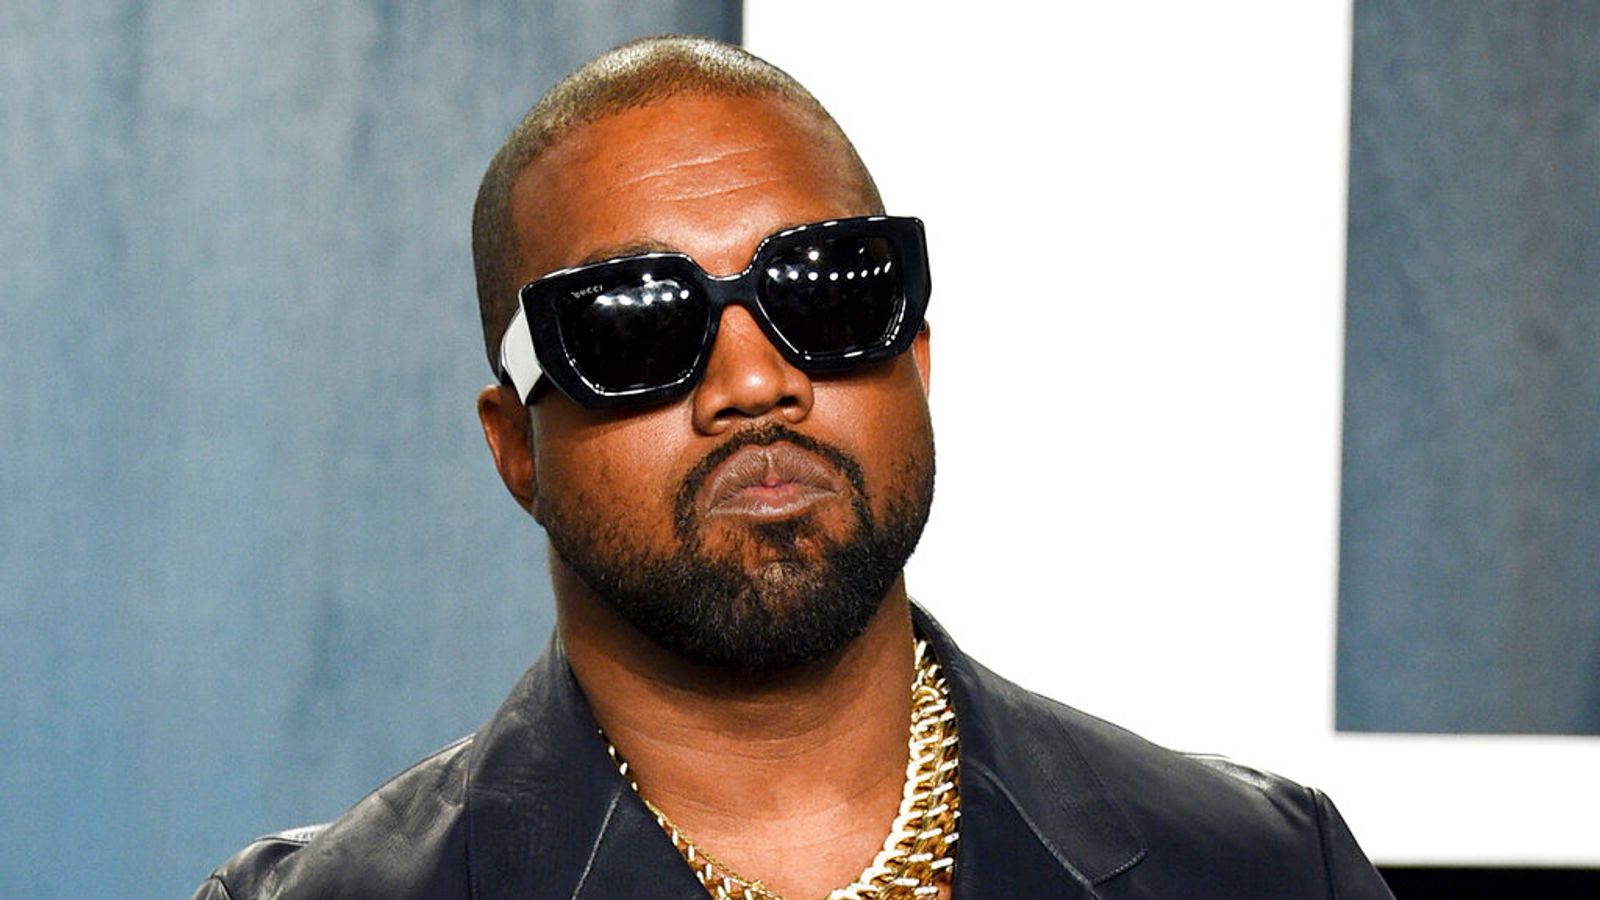 Balenciaga cuts ties with Kanye West with 'no plans for future projects', report says